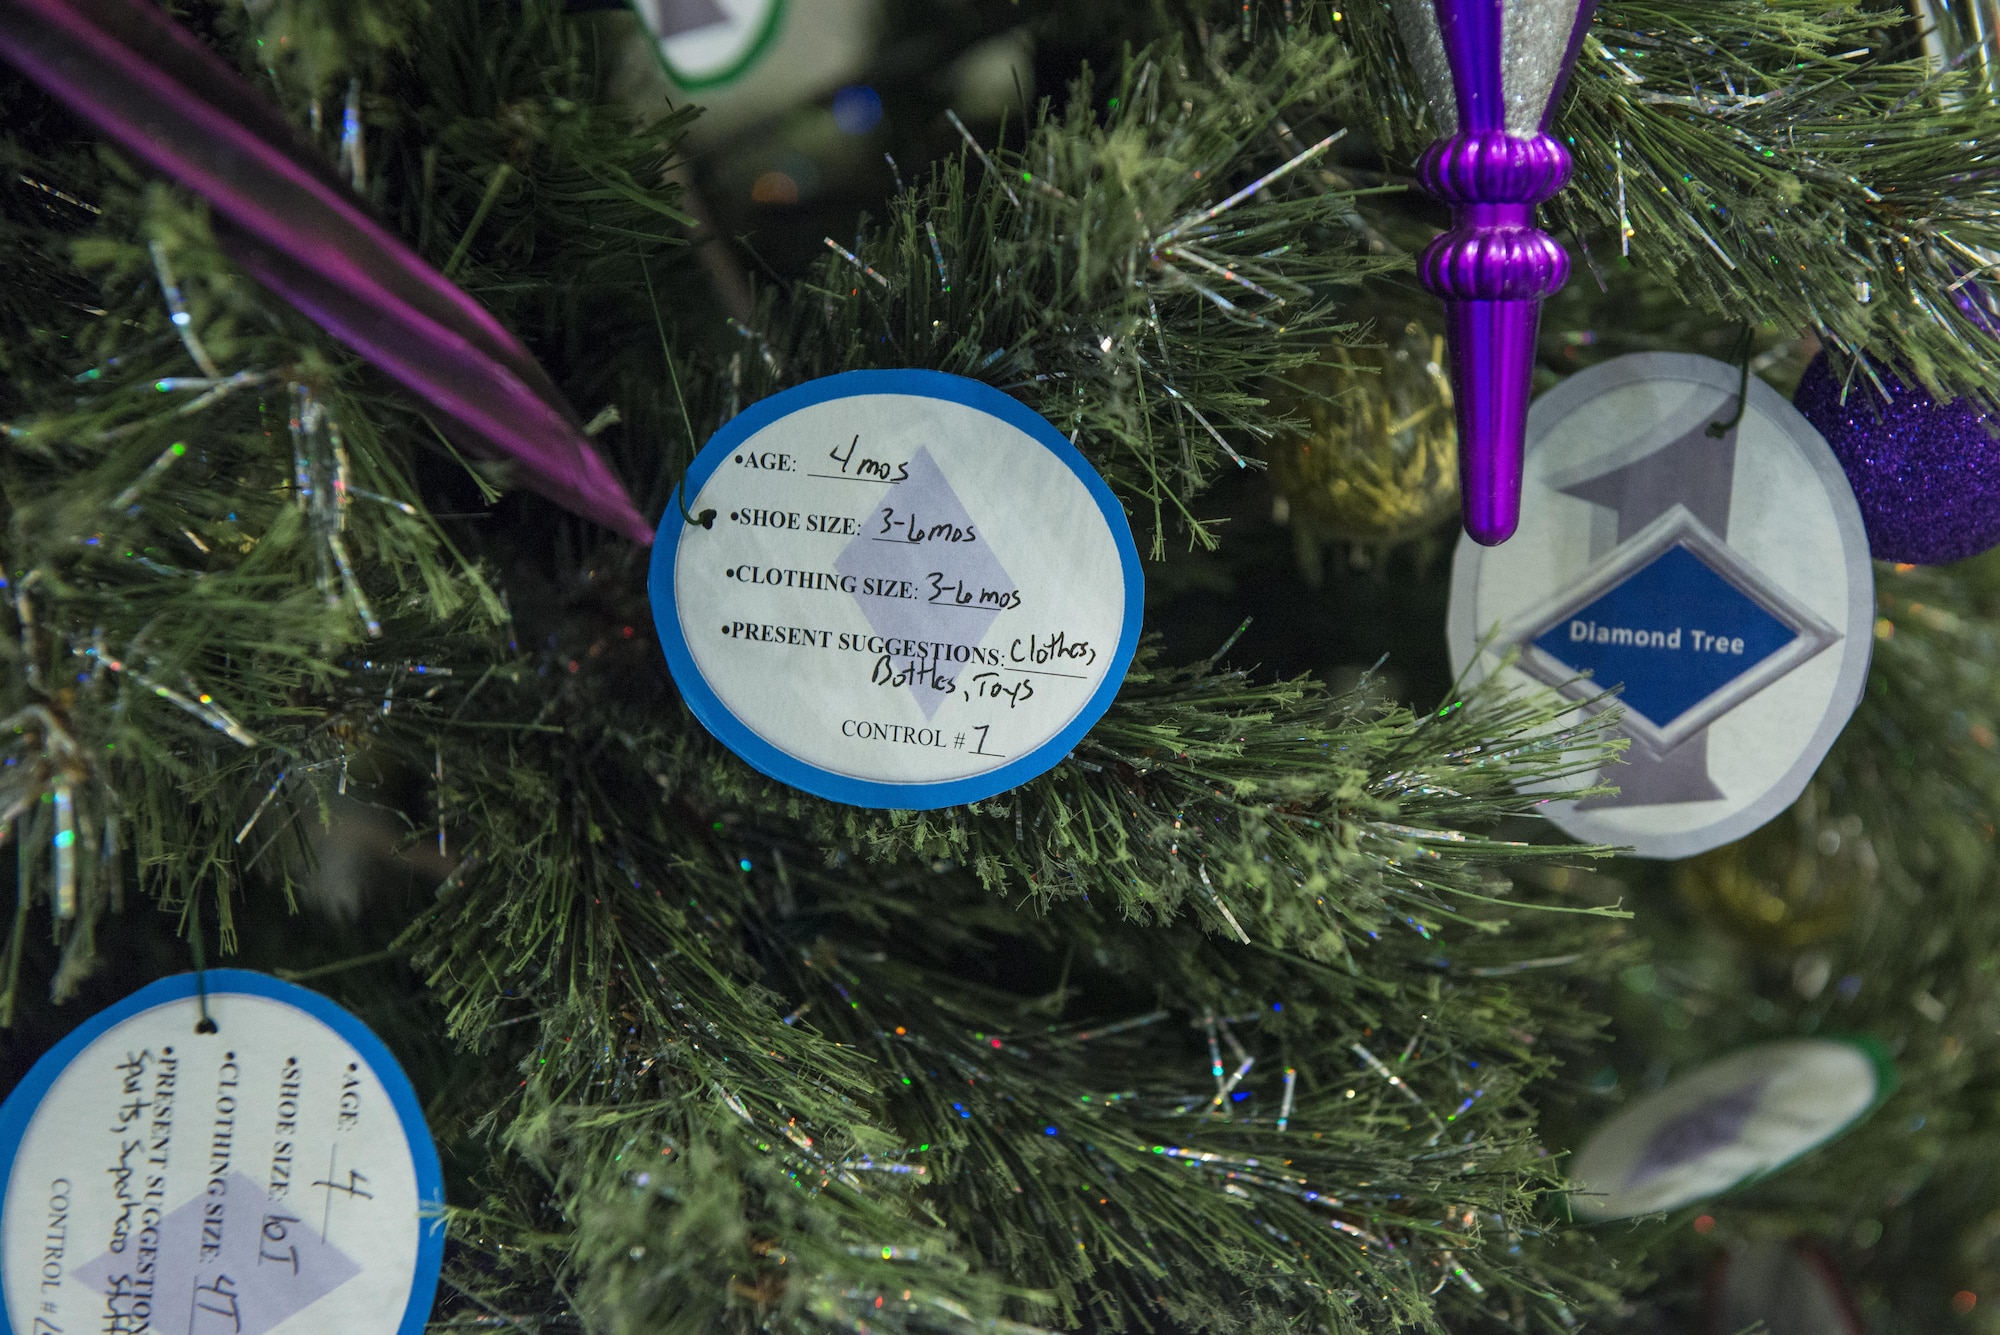 Paper ornaments adorn Holloman’s first sergeant Diamond Tree inside the Base Exchange at Holloman Air Force Base, N.M. on Nov. 29, 2016. The Diamond Tree program offers assistance to low income and junior enlisted families who are not able to afford Christmas gifts for their children. (U.S. Air Force photo by Airman 1st Class Alexis P. Docherty) 